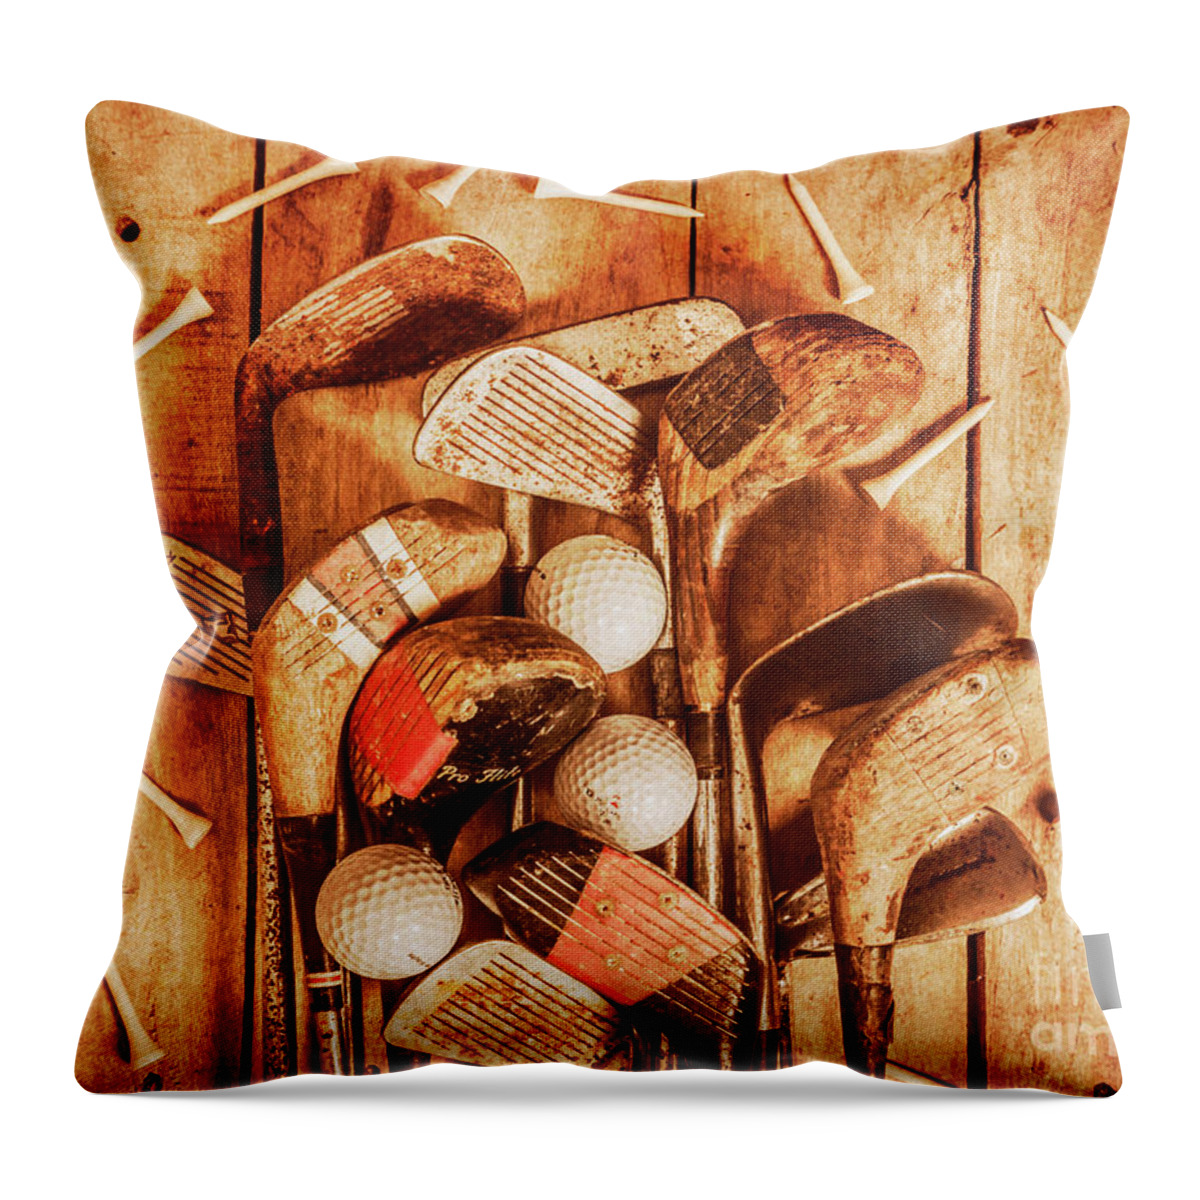 Retro Throw Pillow featuring the photograph Another round? by Jorgo Photography